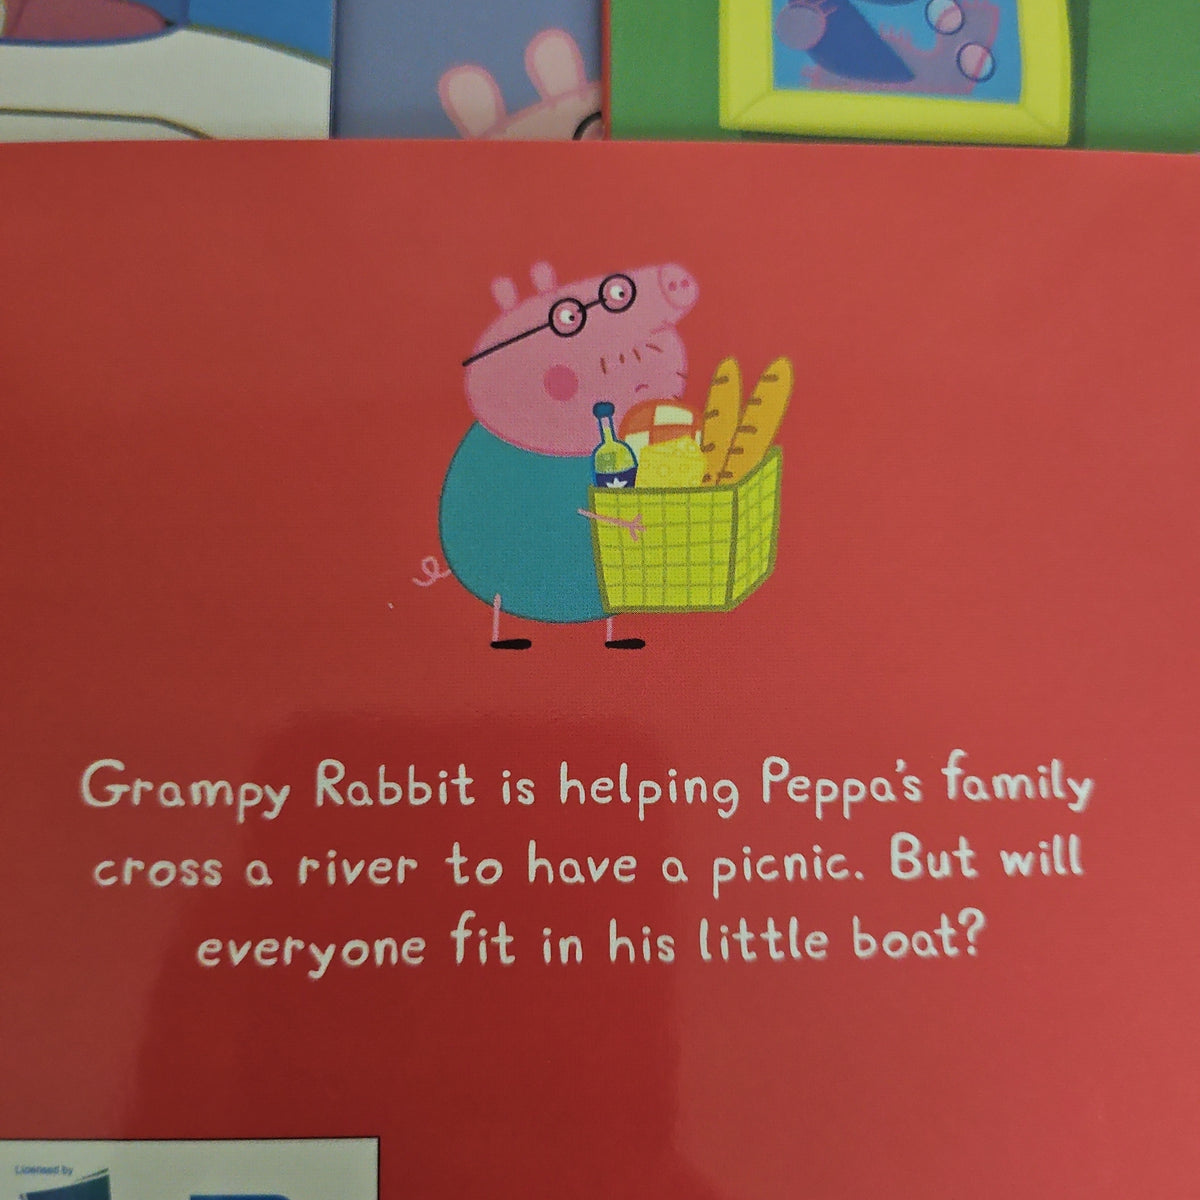 The Amazing Peppa Pig Collection:The Little Boat